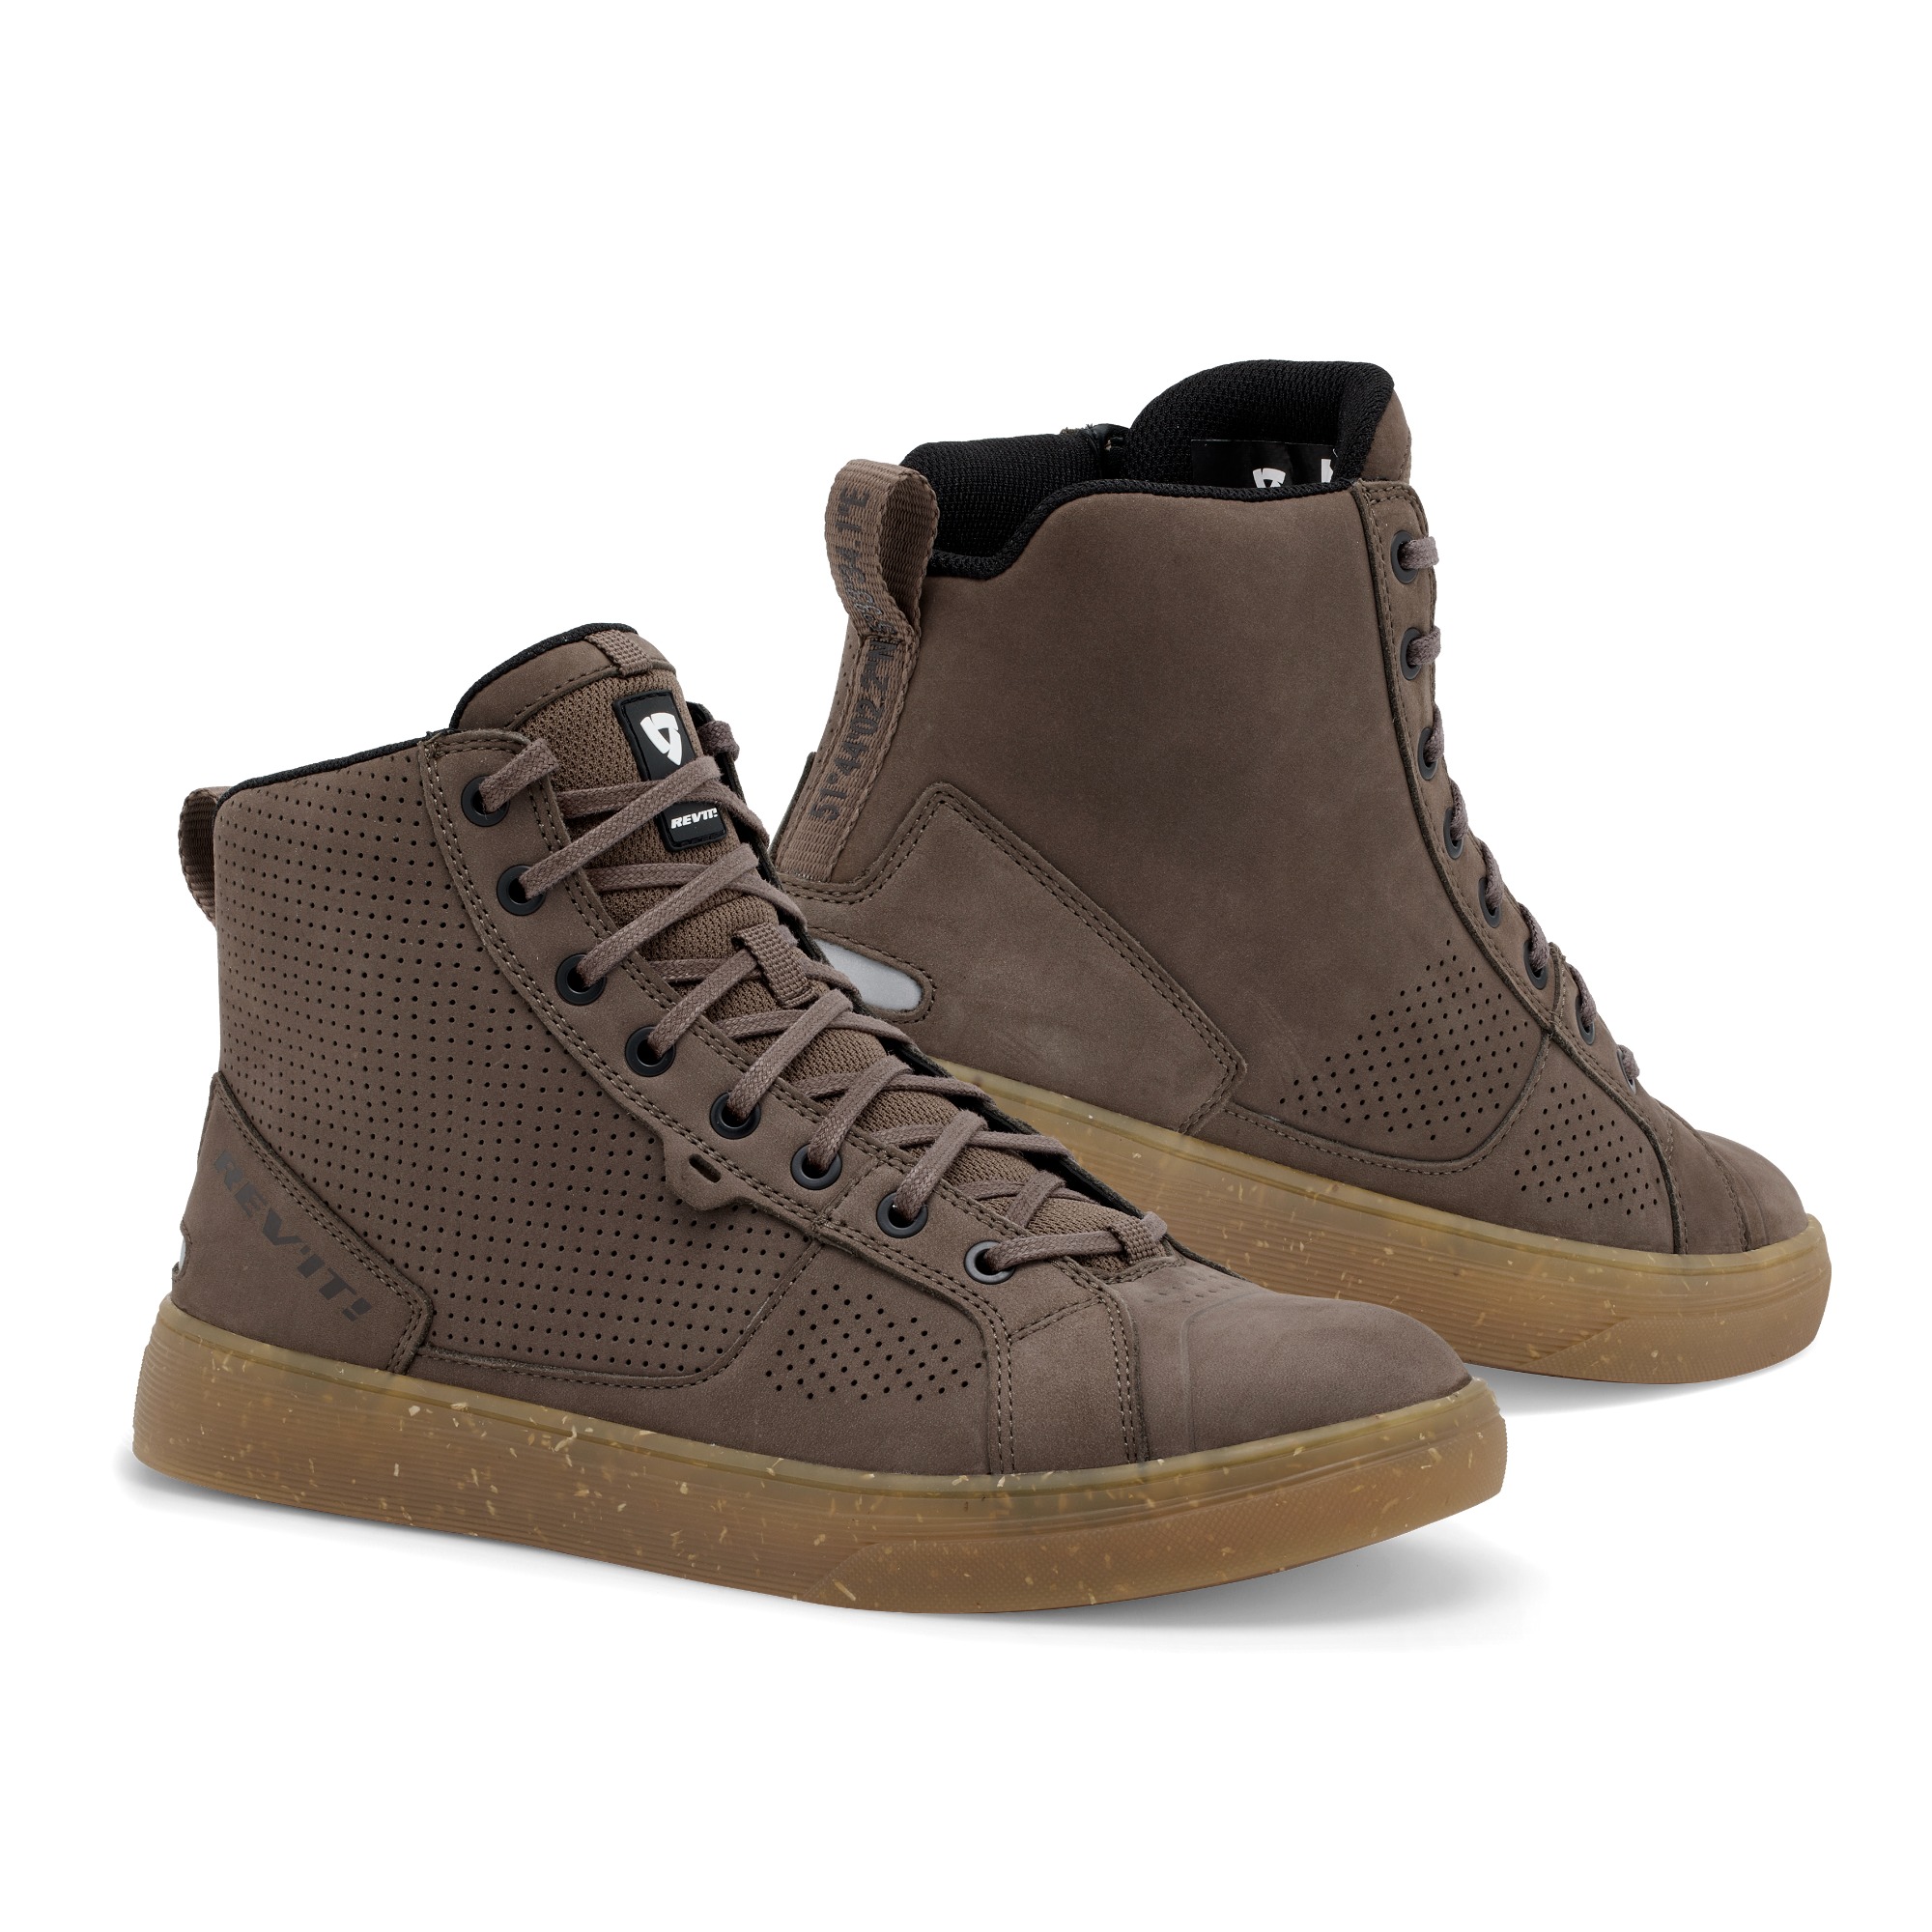 Rev'it! Arrow Taupe/Brown 39 Motorcycle Boots